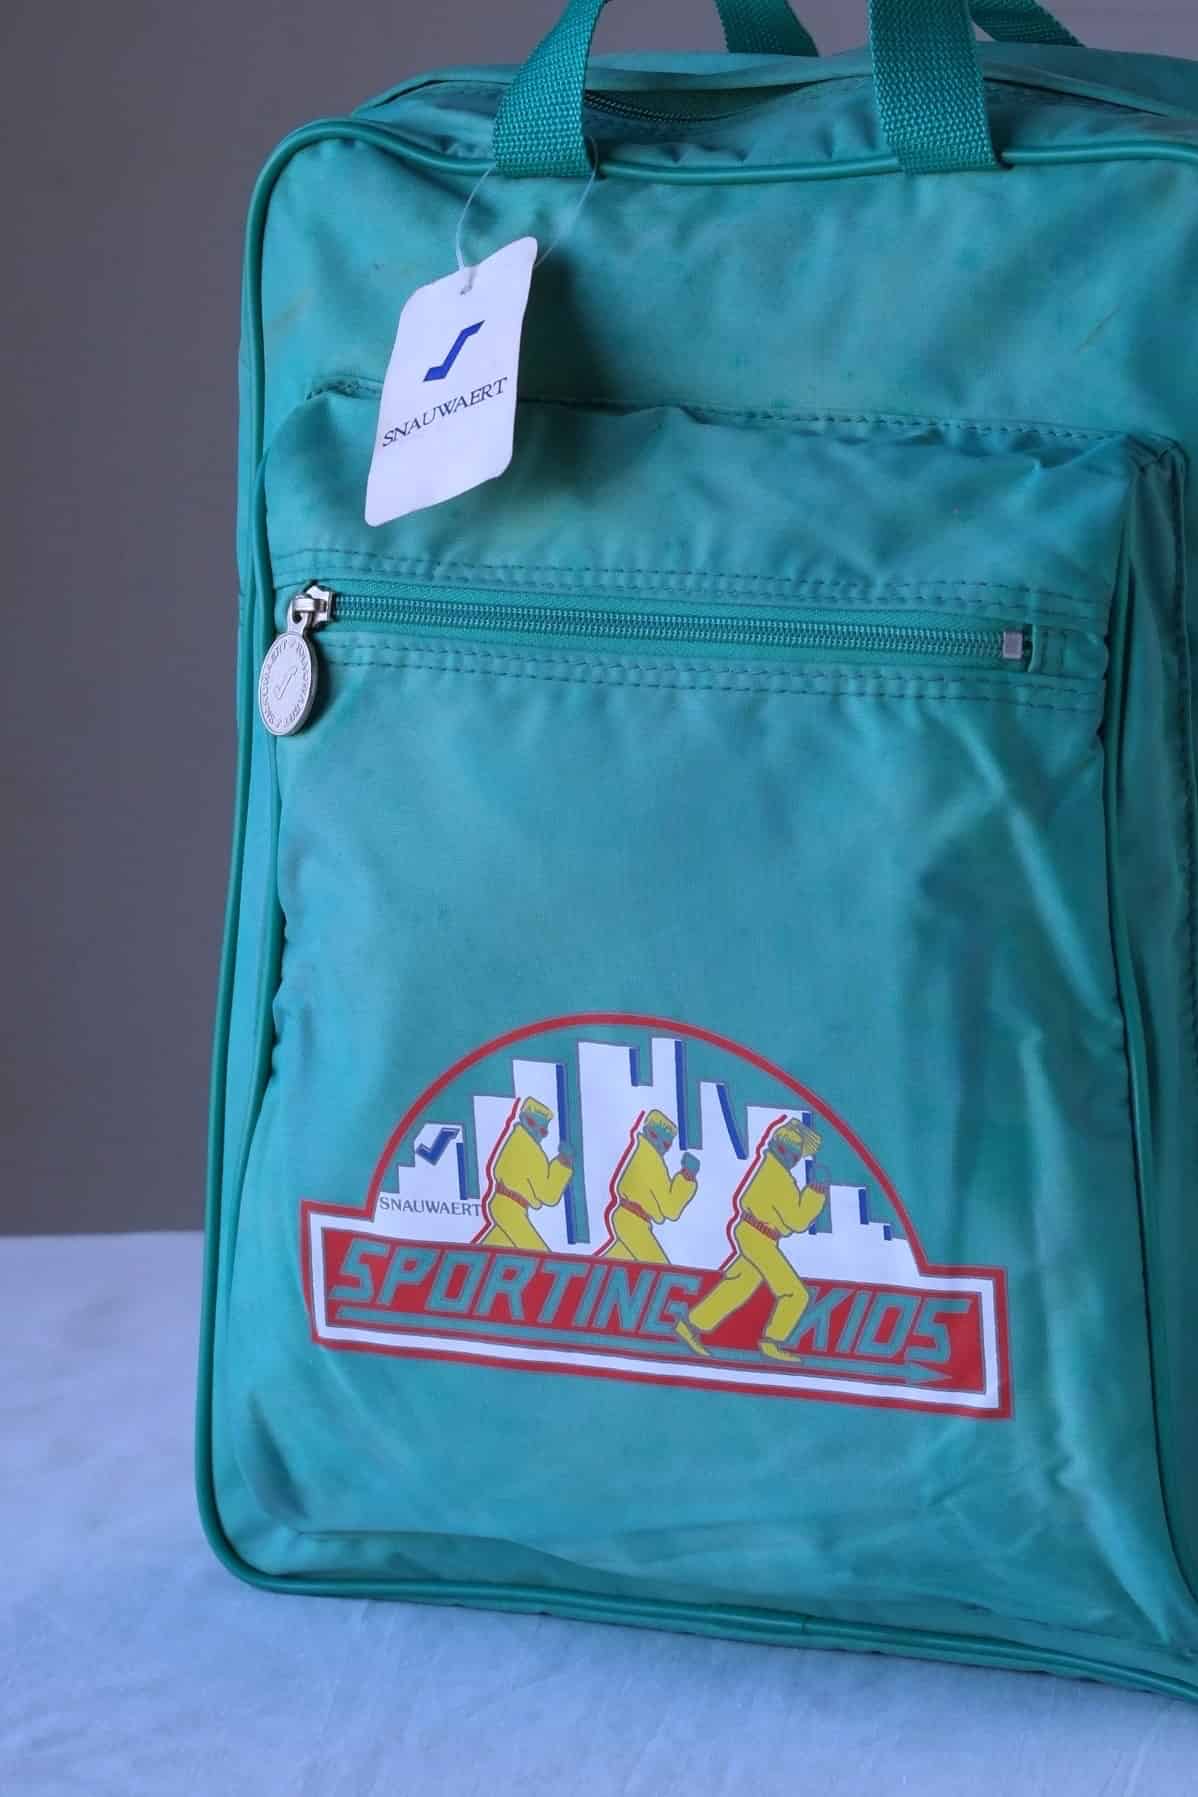 1980's Backpack close up